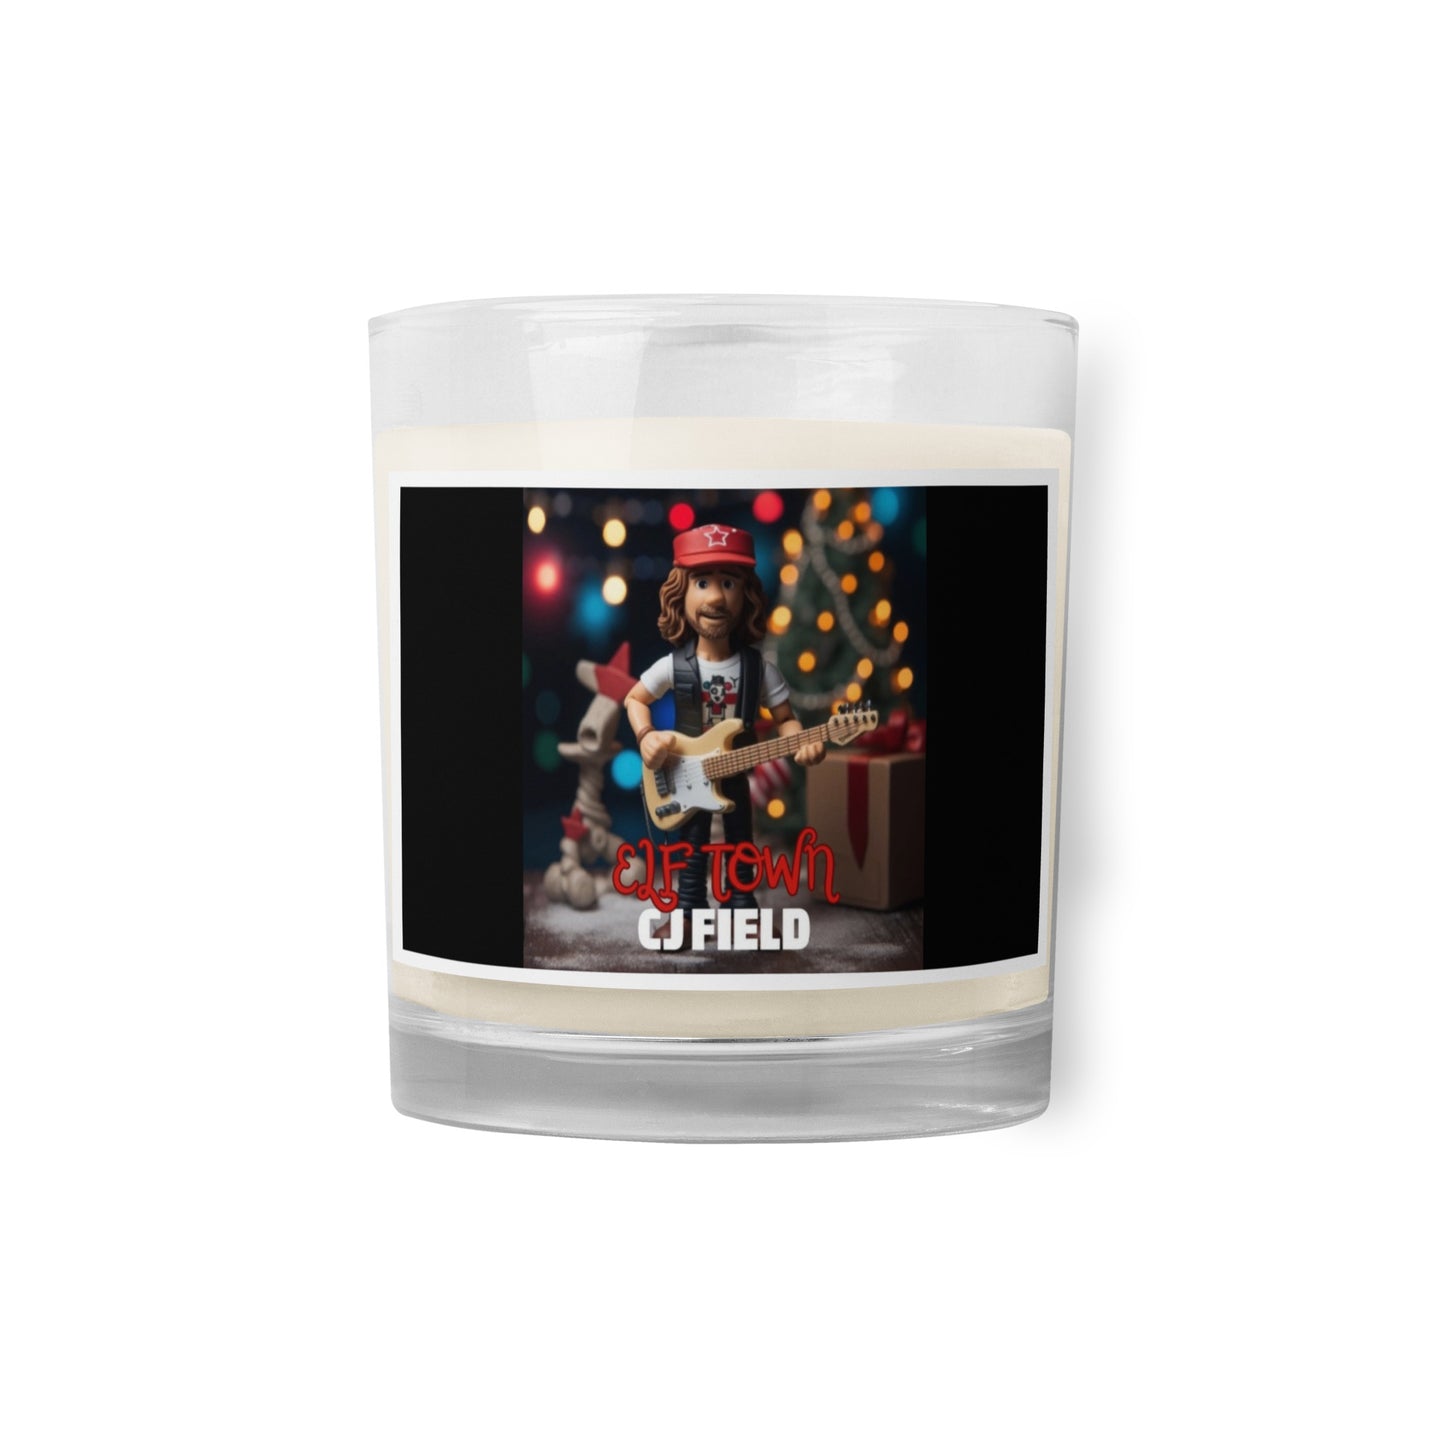 "Elf Town" Wax Candle